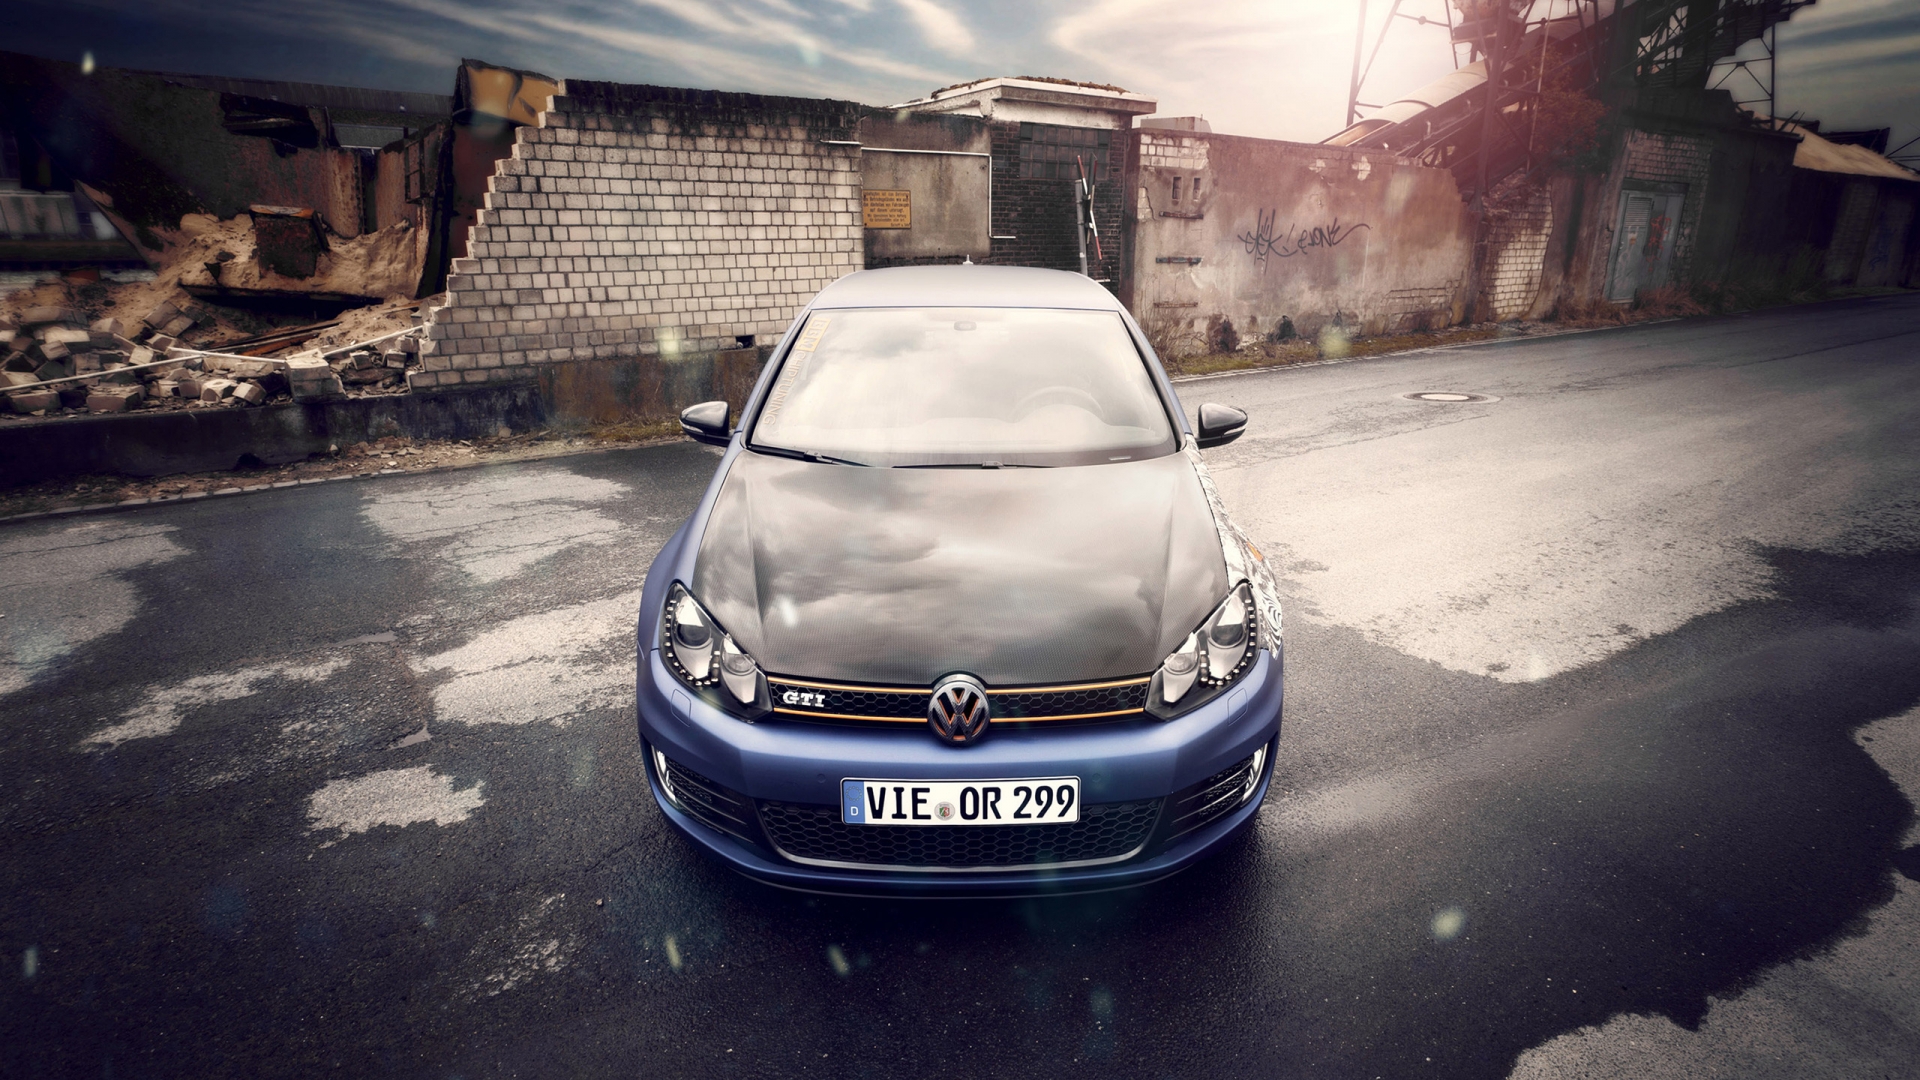 VW Golf 6 by BBM for 1920 x 1080 HDTV 1080p resolution